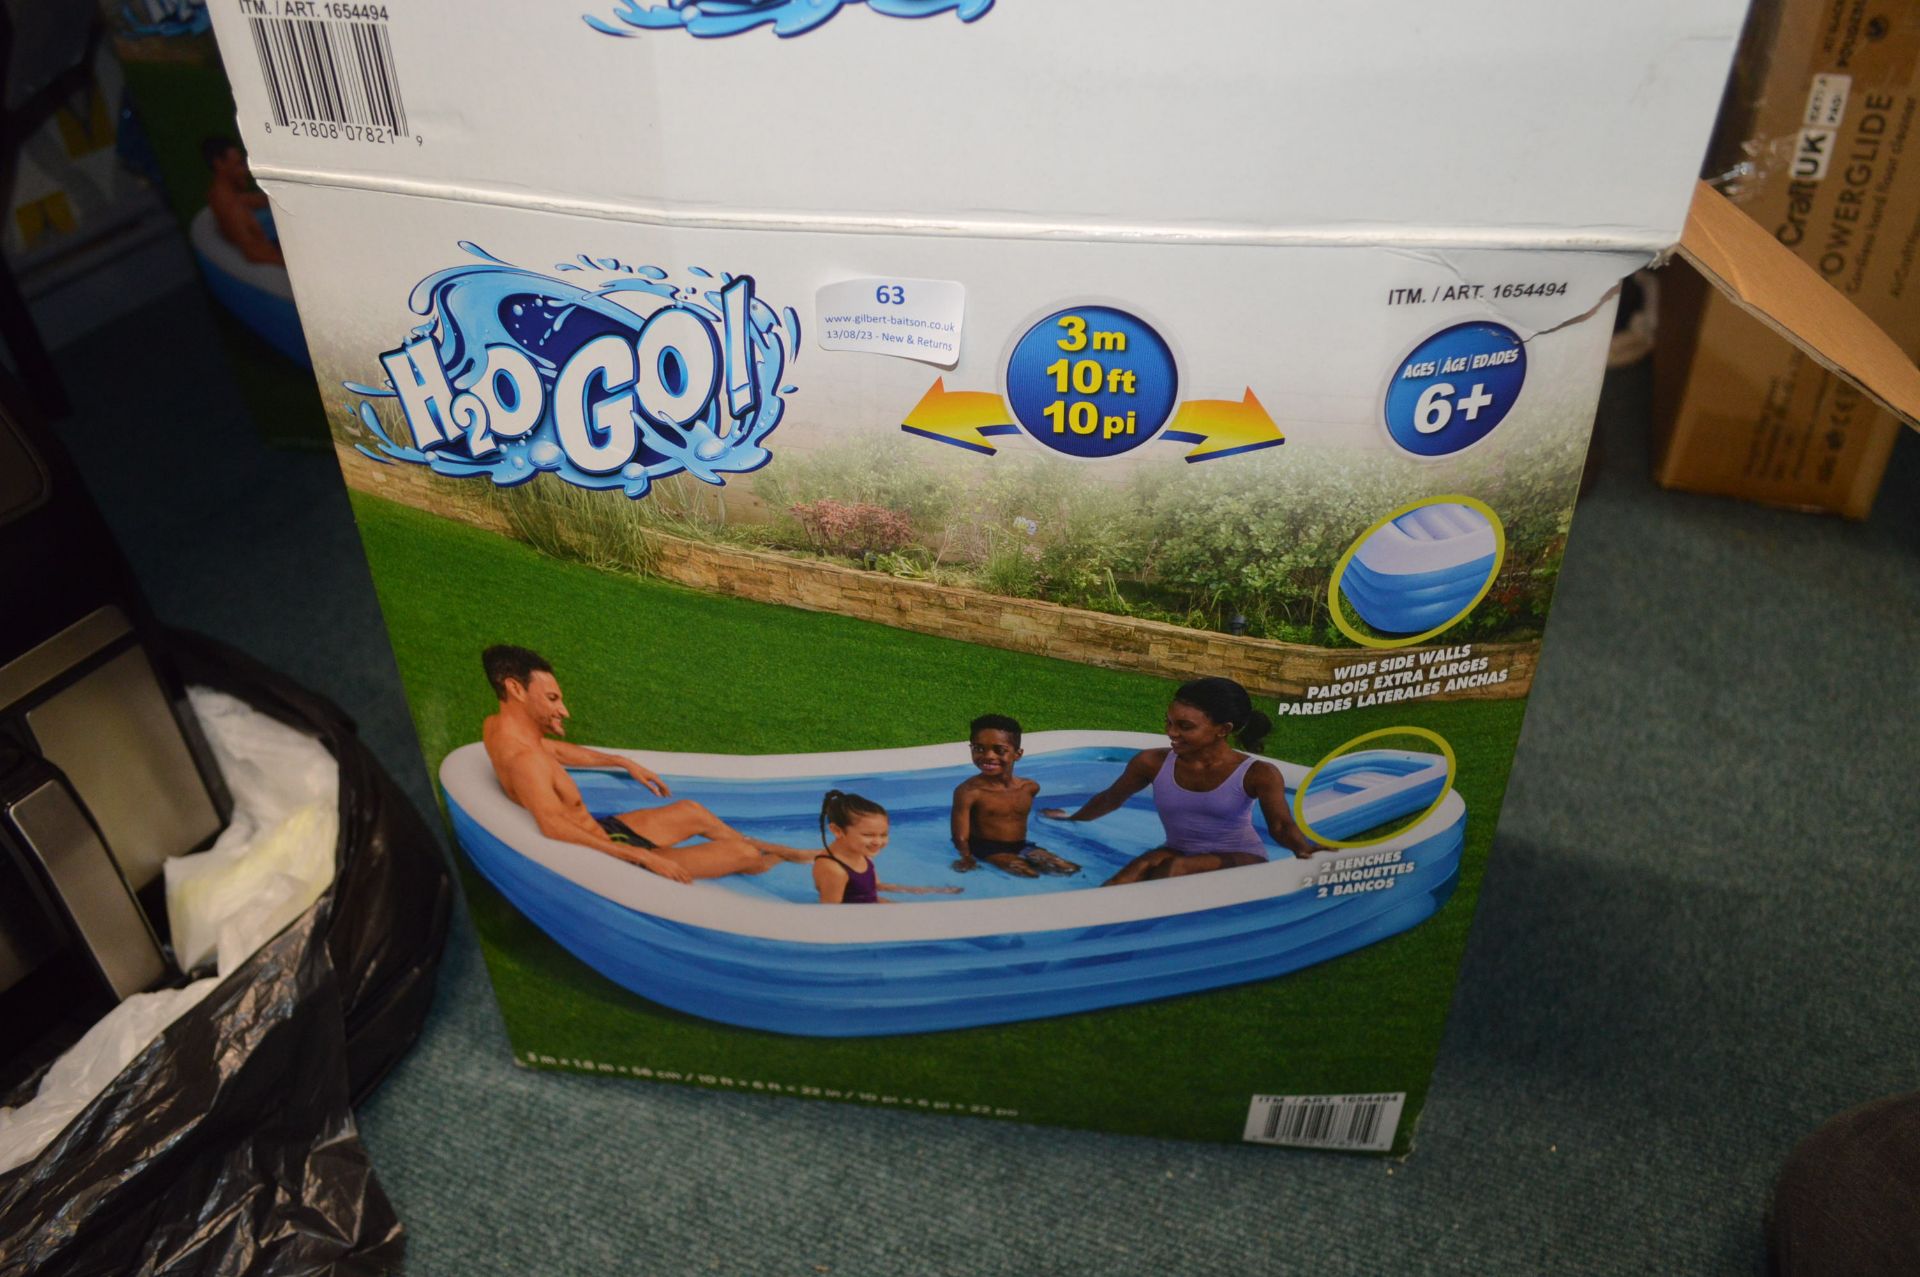 *H2O Go 3m Inflatable Family Pool